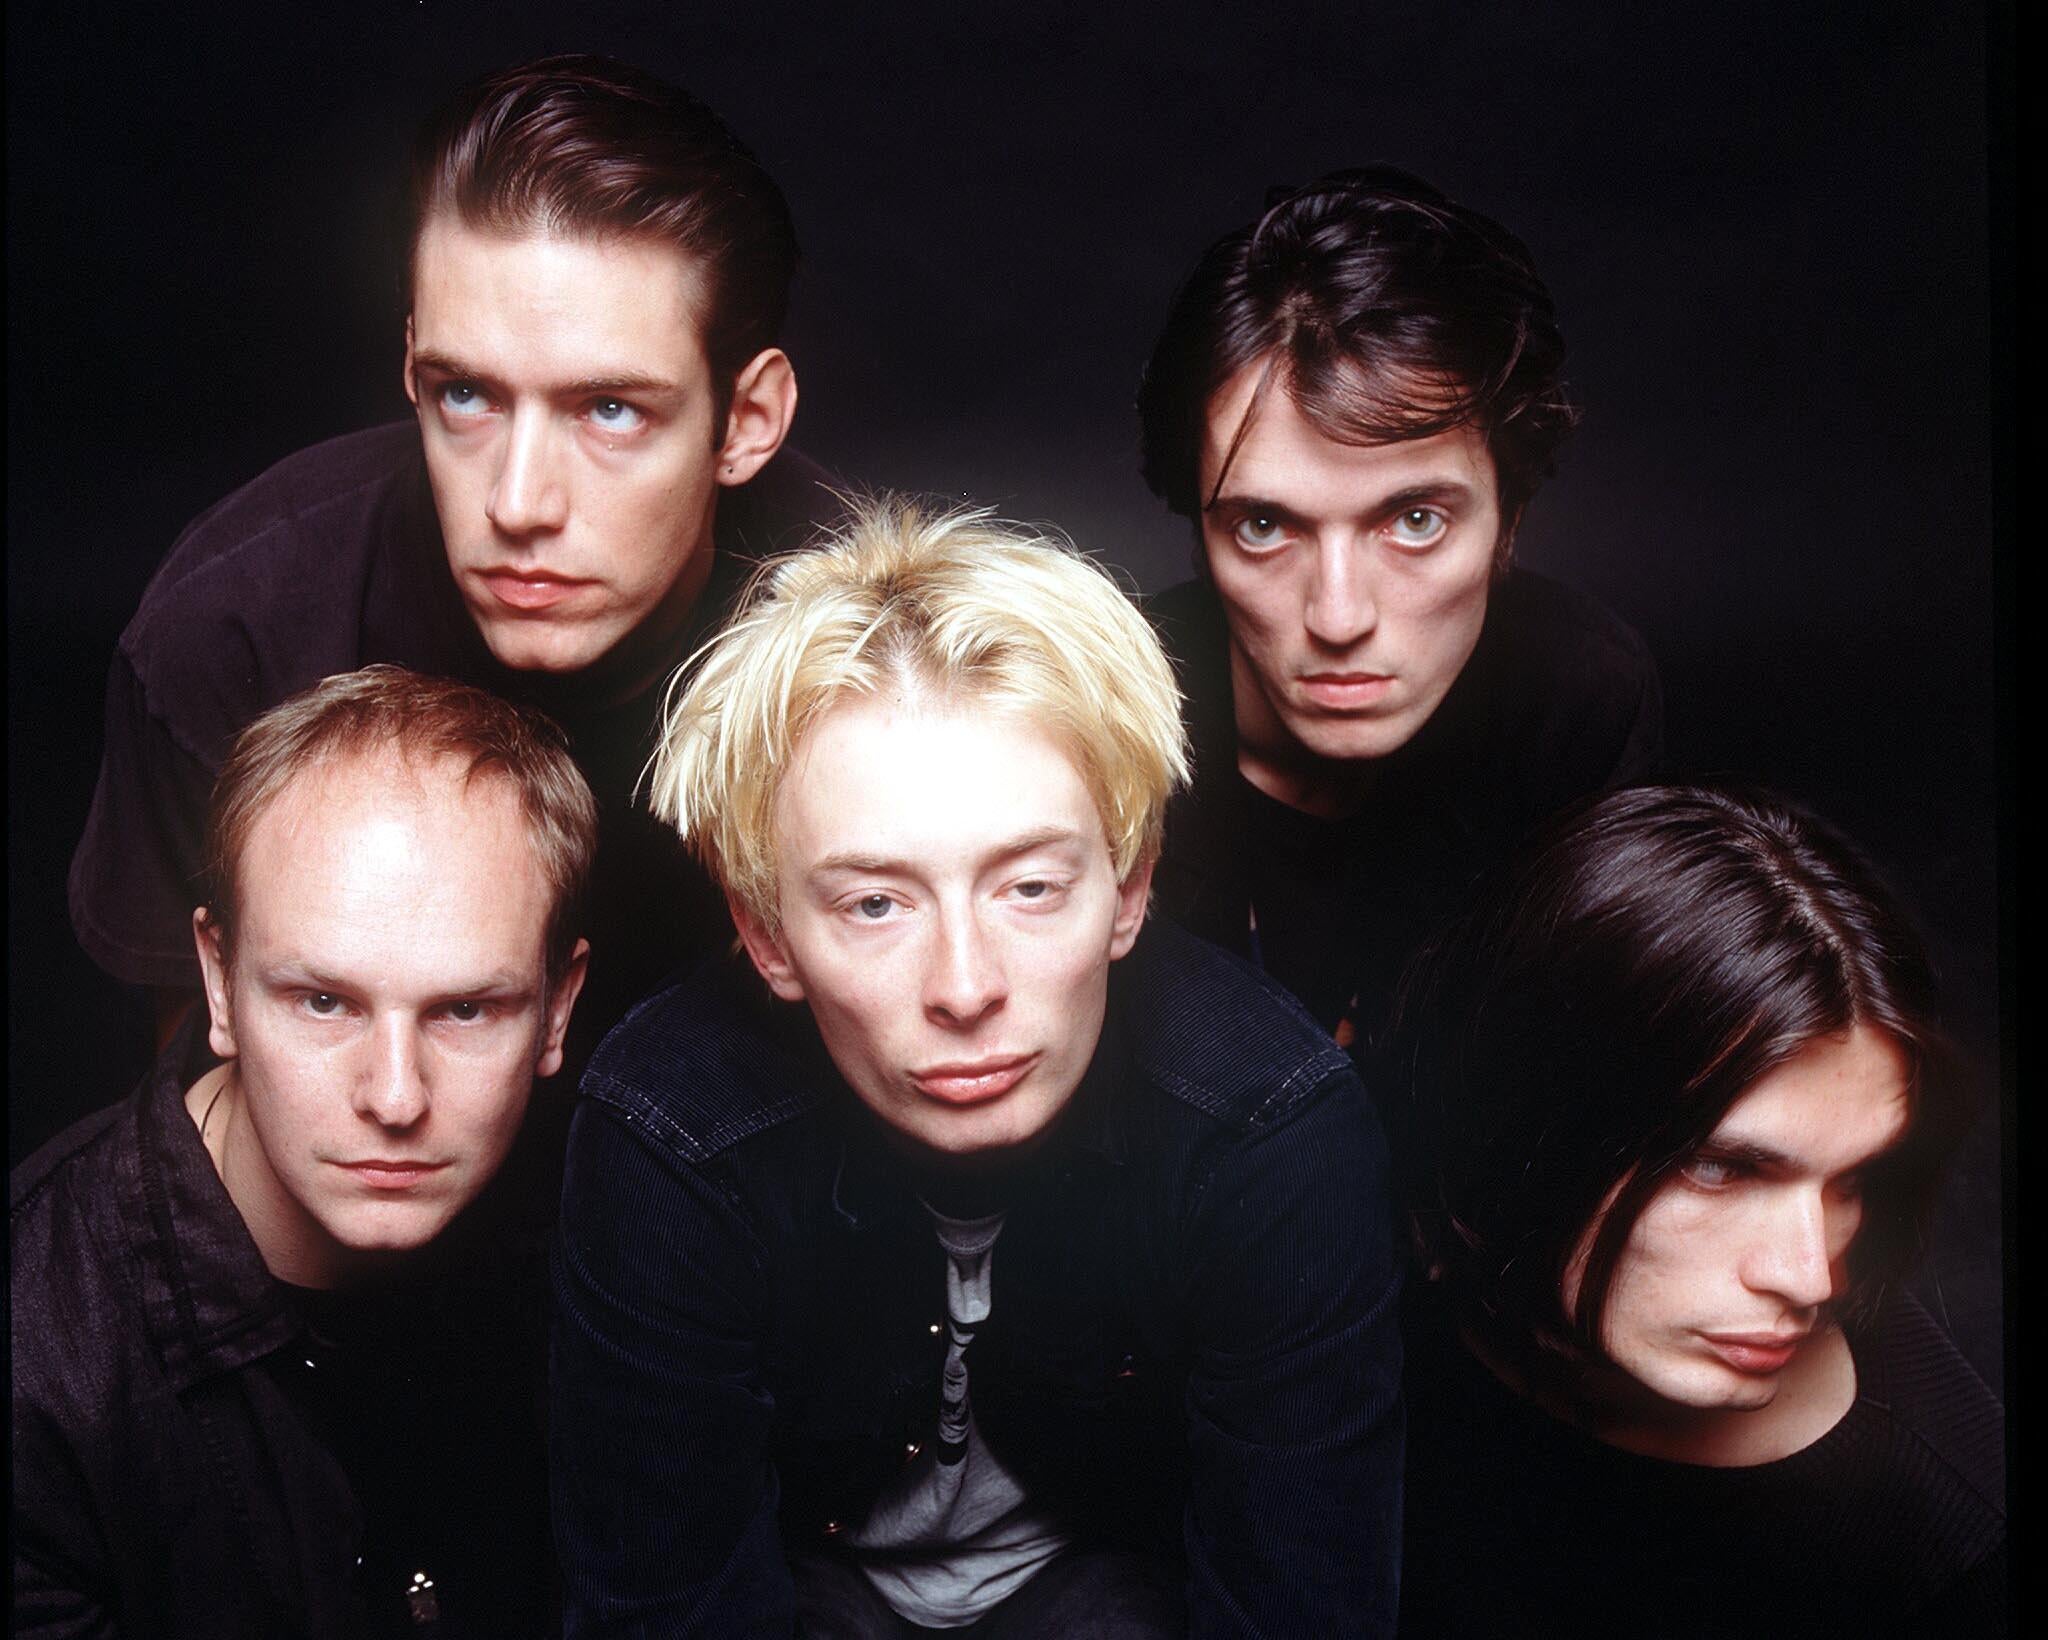 Radiohead side project The Smile have reportedly completed an album